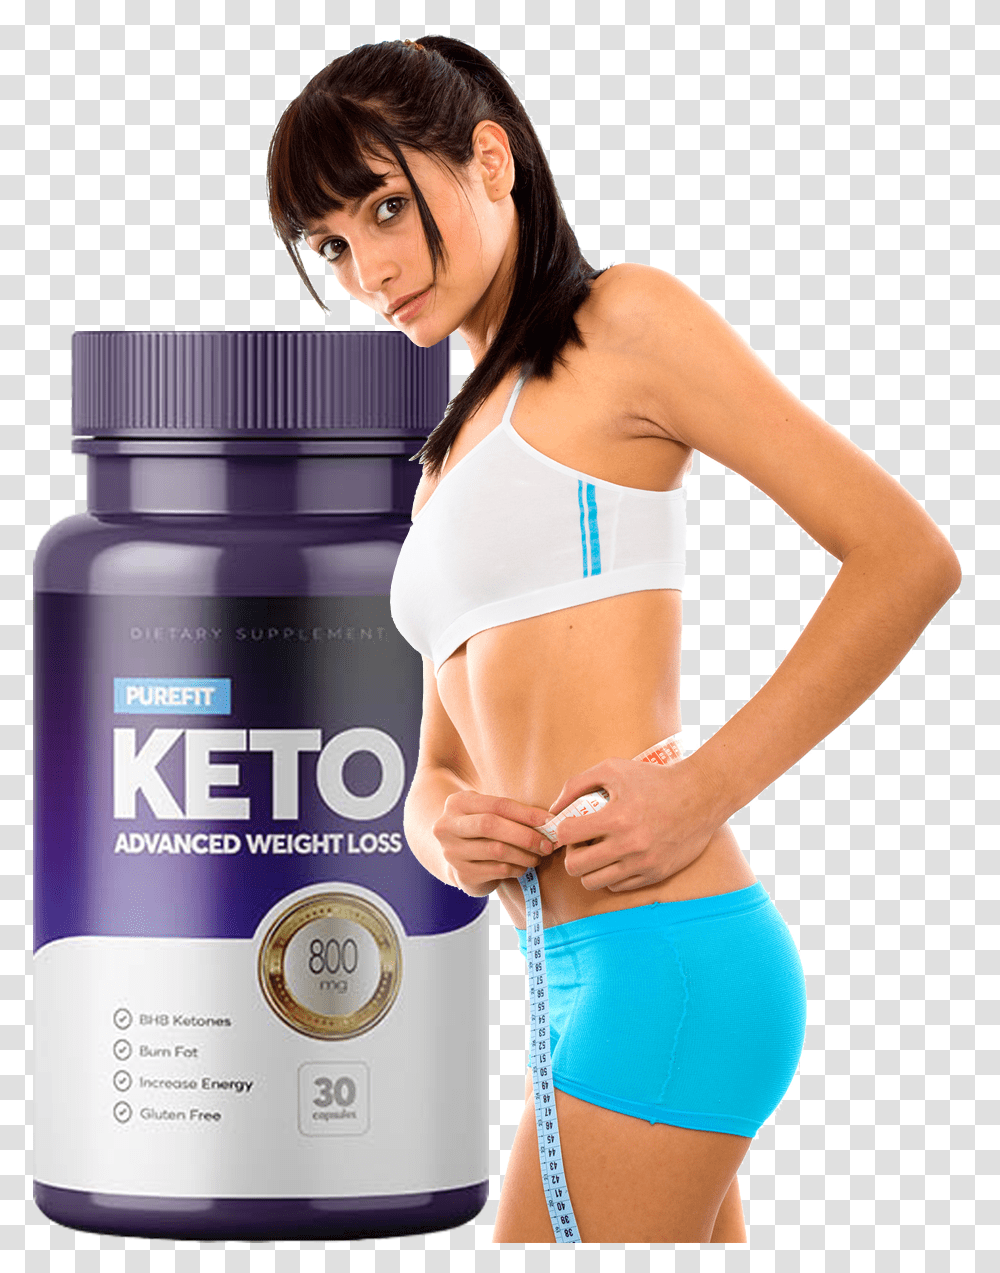 Keto Advanced Weight Loss Review Weight Loss Images Hd, Apparel, Female, Person Transparent Png